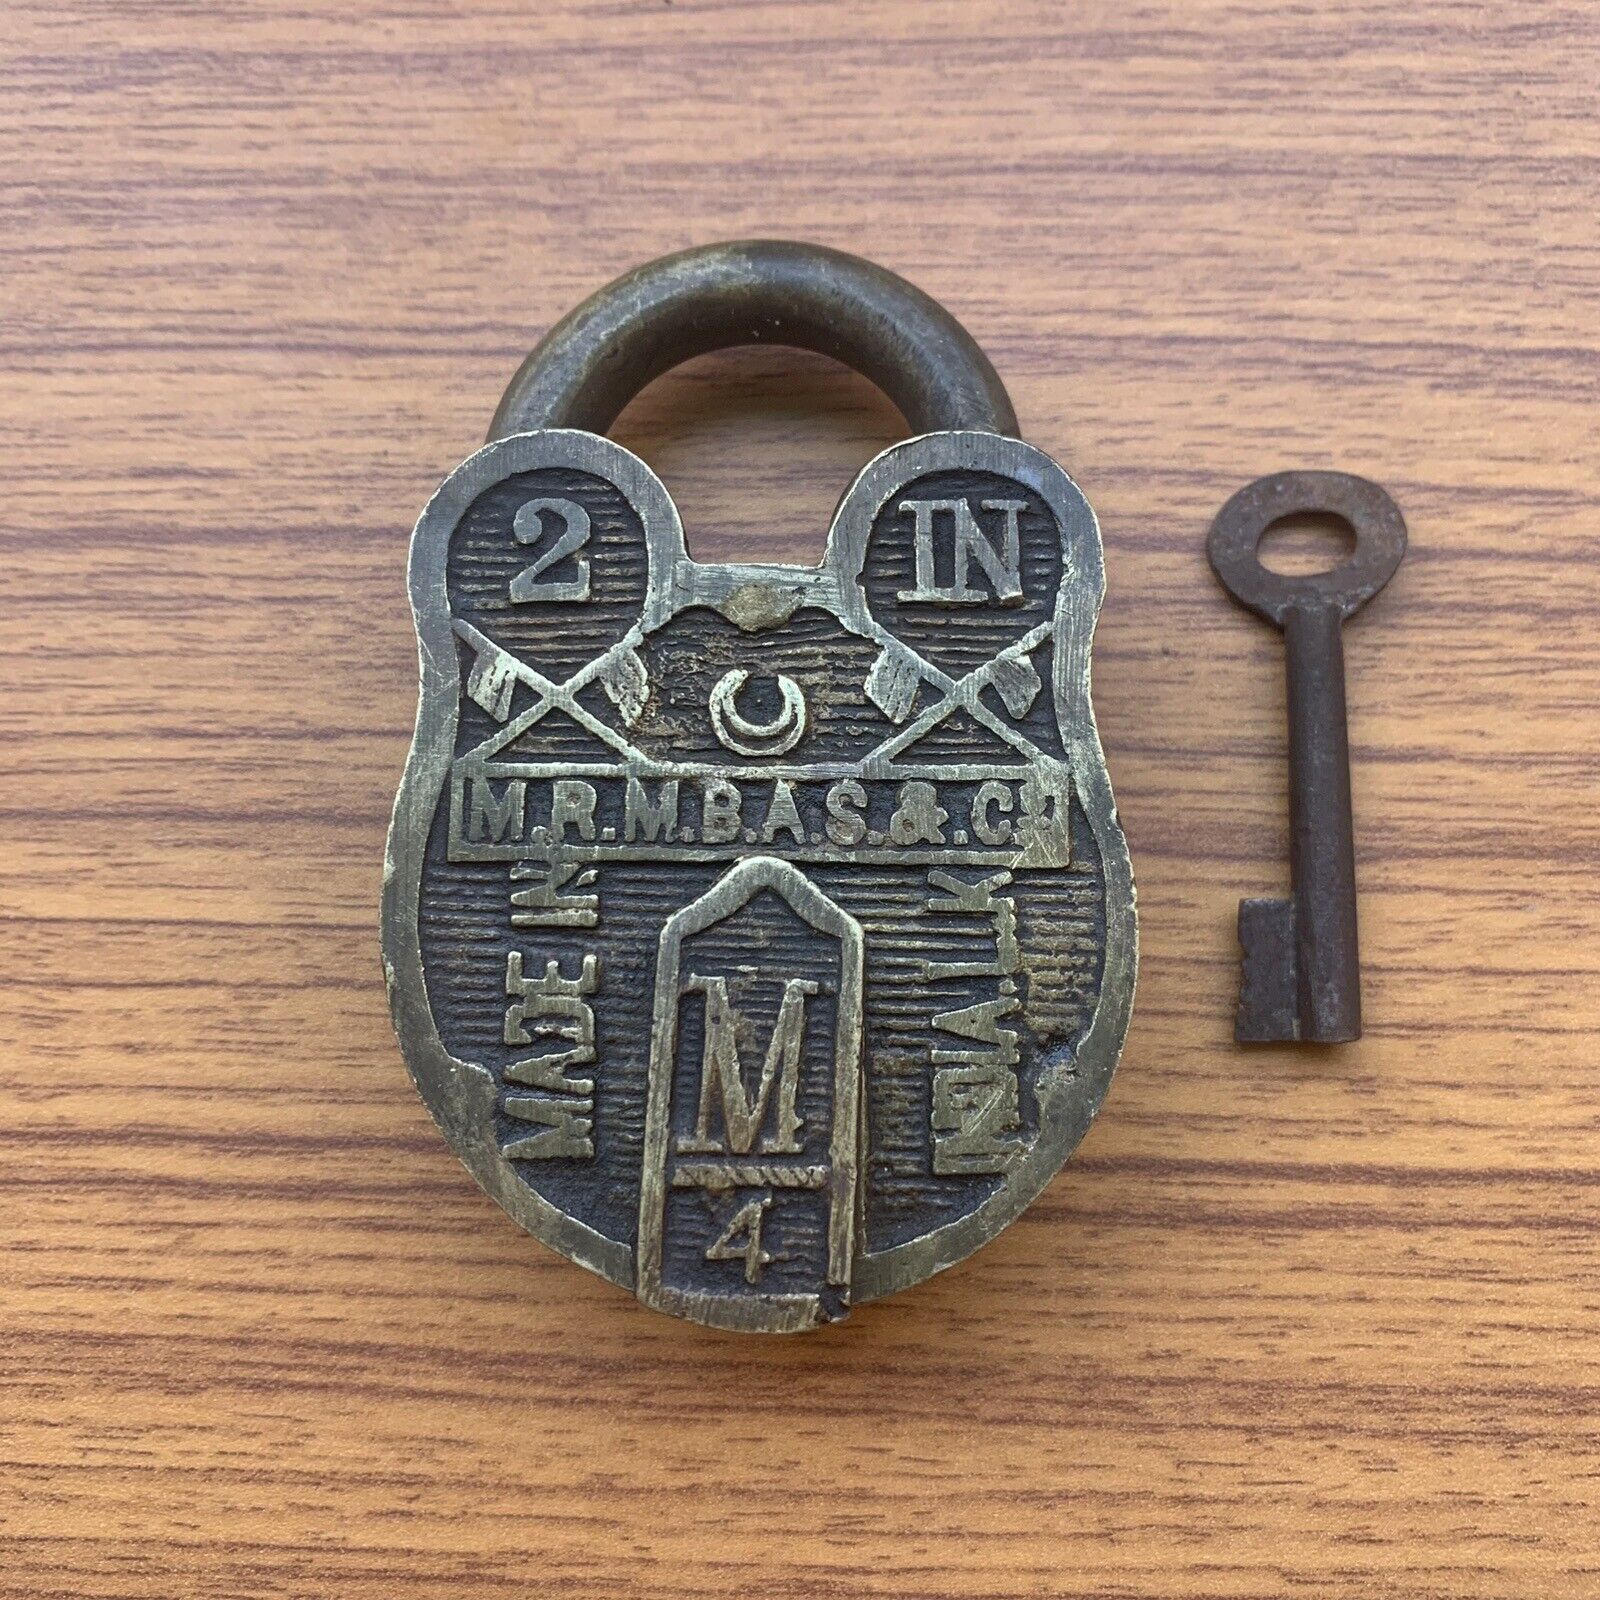 AN OLD OR ANTIQUE BRASS PADLOCK OR LOCK WITH KEY, NICE CARVING.